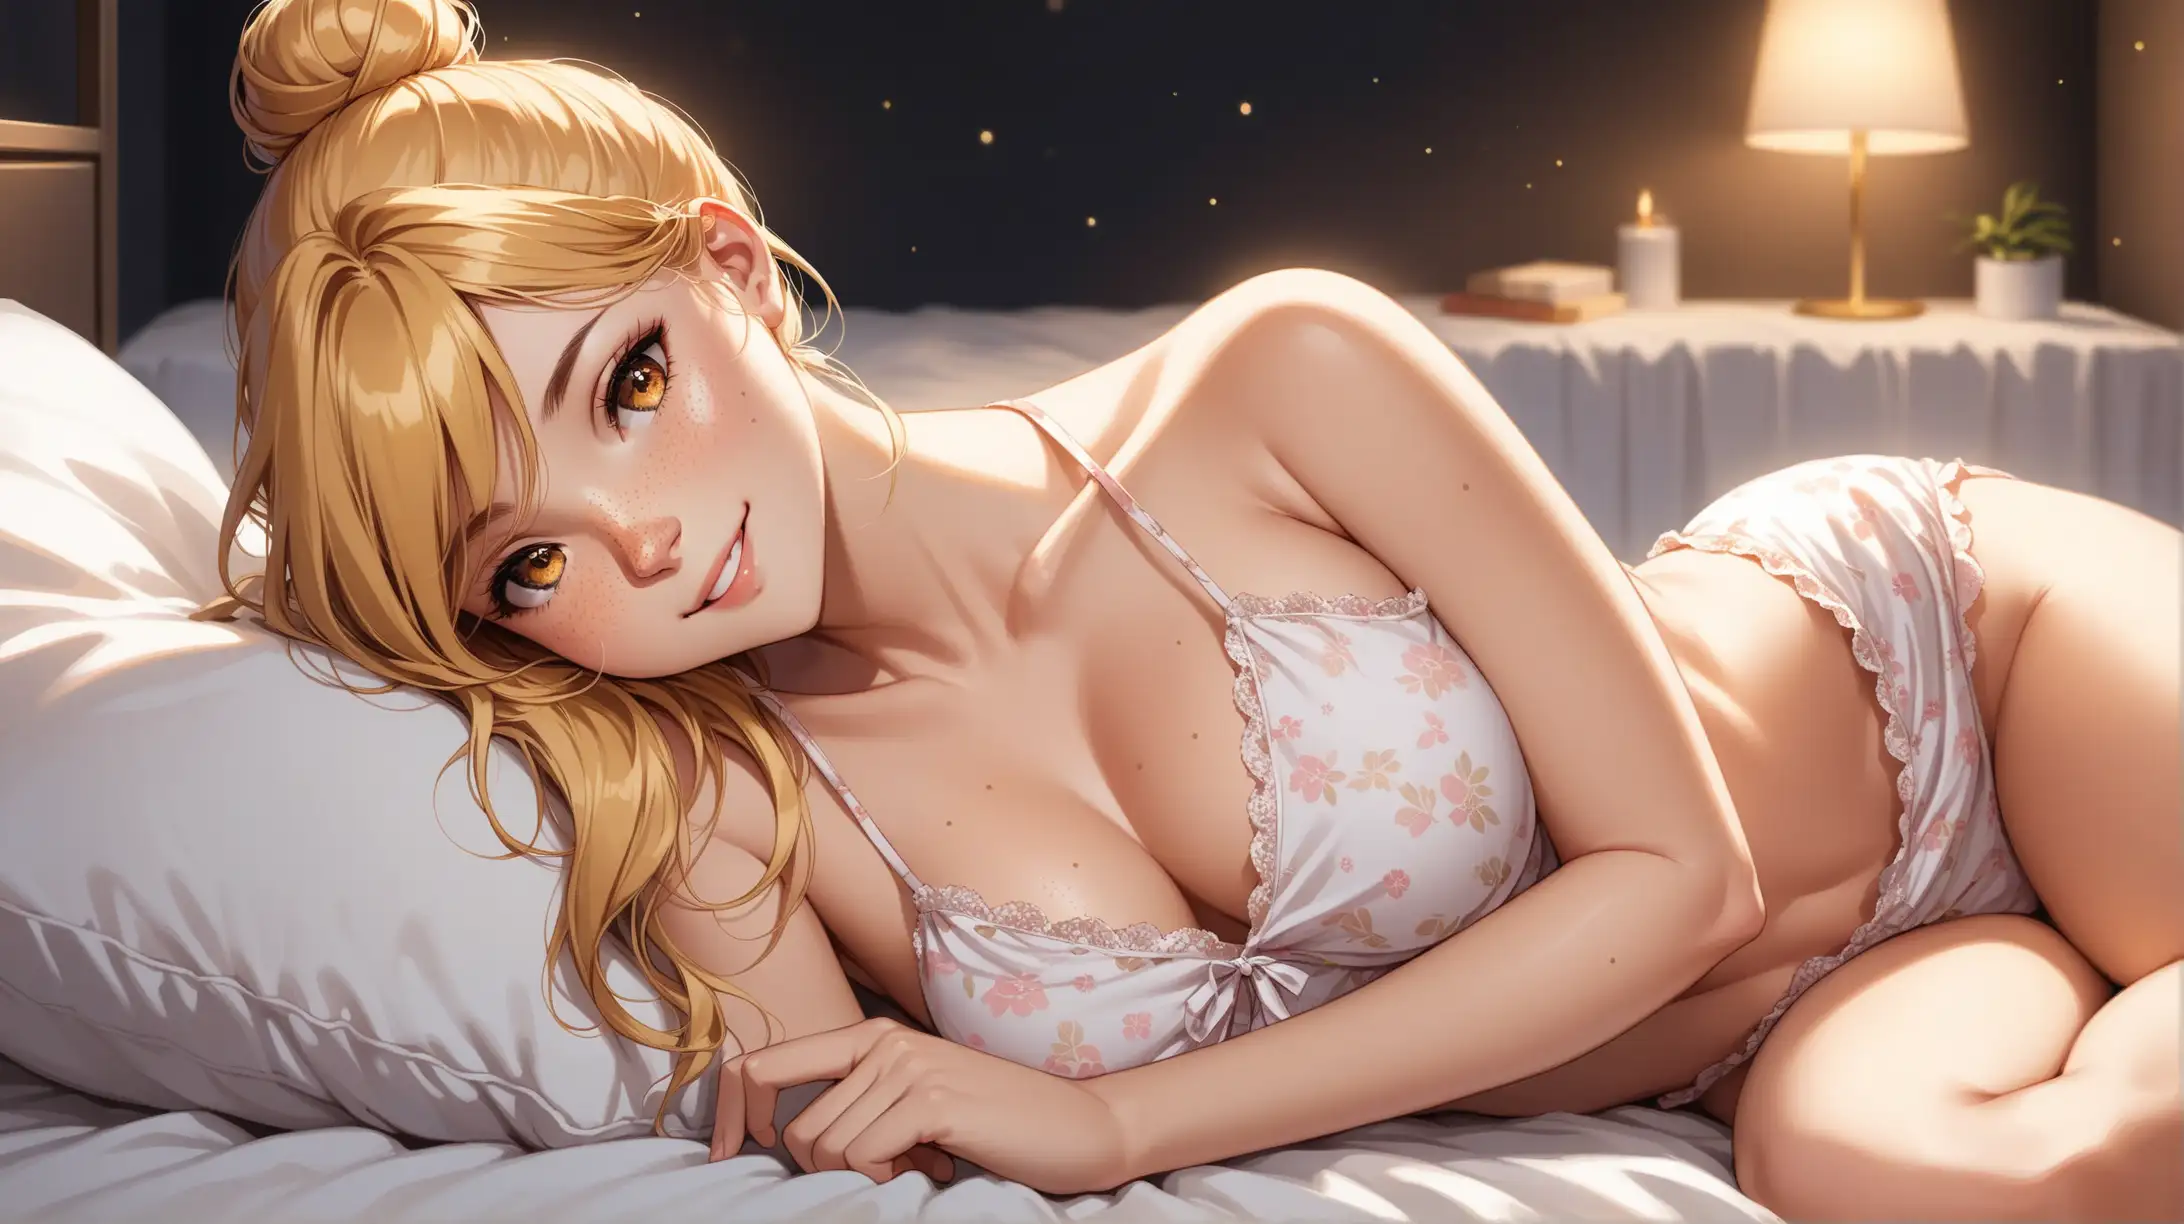 Draw a young woman, long blonde hair in a bun, gold eyes, freckles, perky figure,
sleepwear, high quality, long shot, laying on back, indoors, bedroom, seductive pose, dark lighting, smiling at the viewer